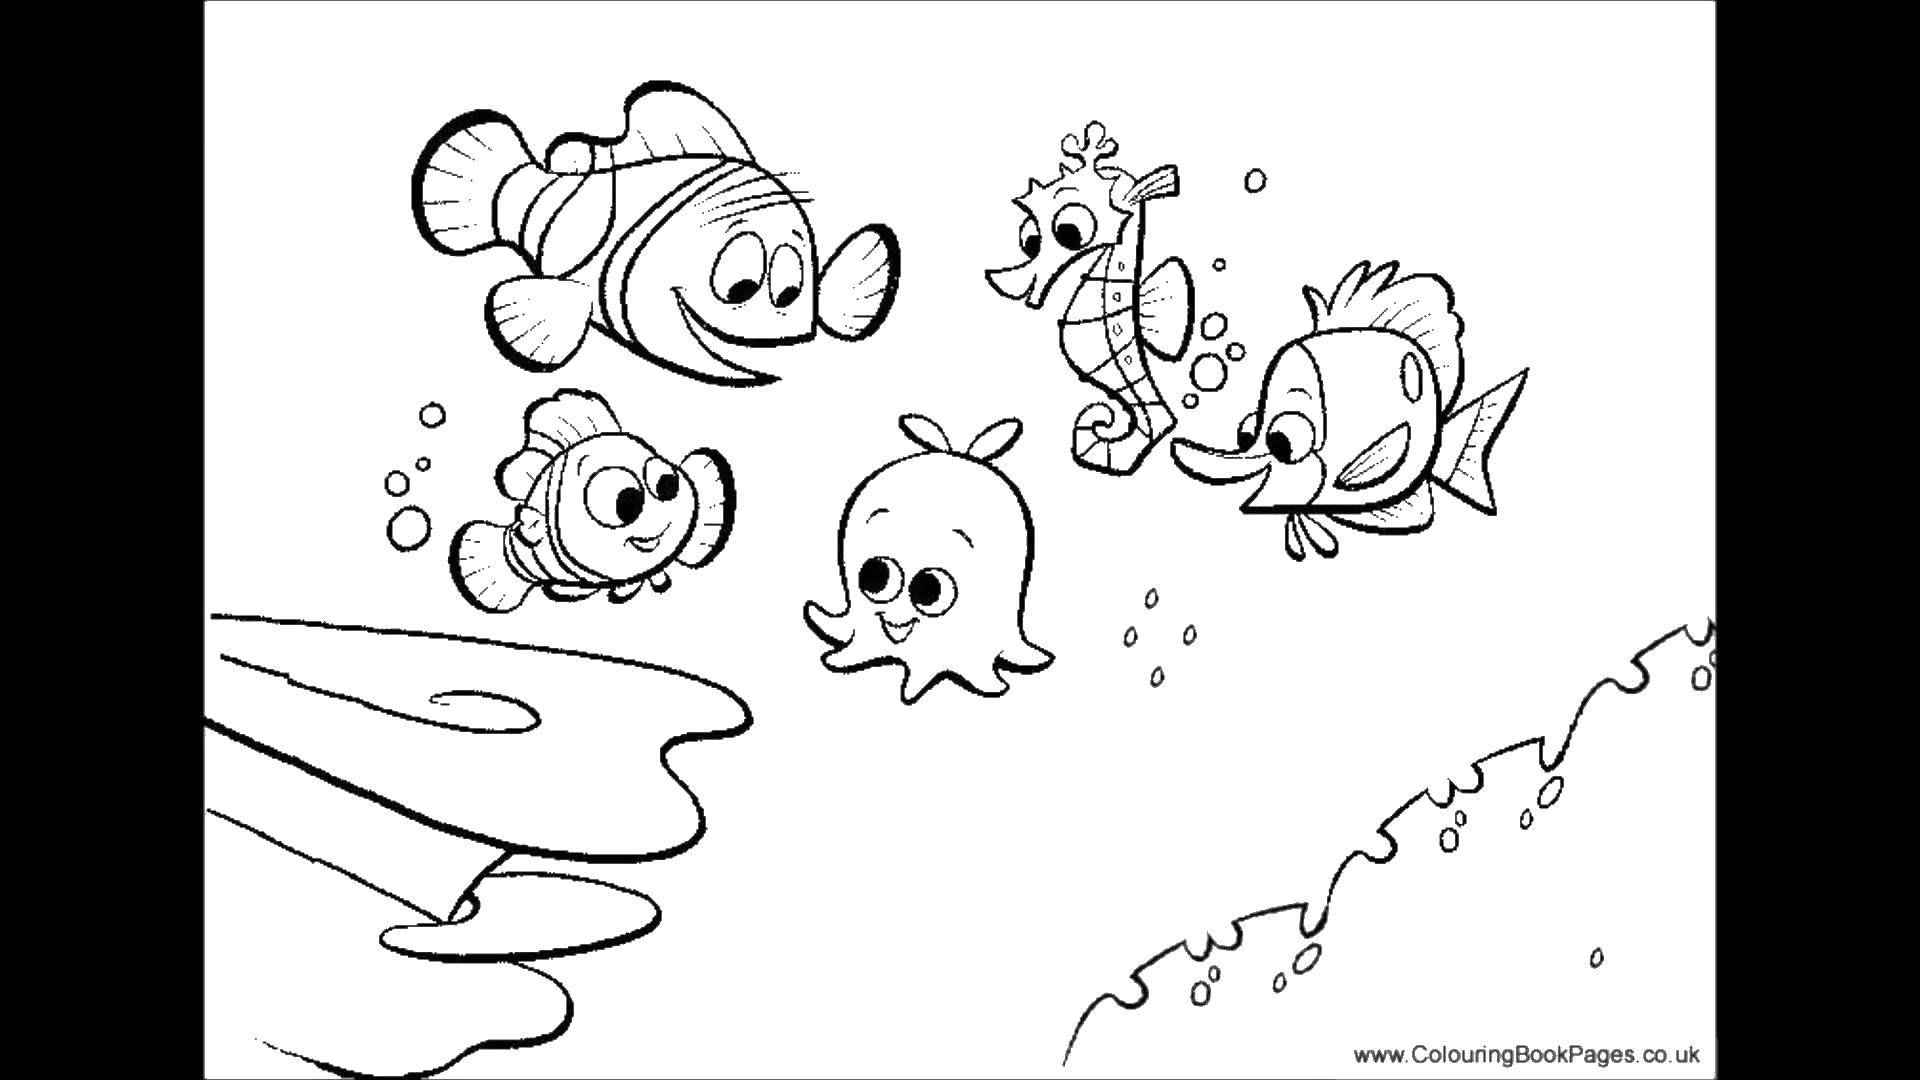 Coloring Nemo and friends. Category Sea animals. Tags:  Underwater world, fish.